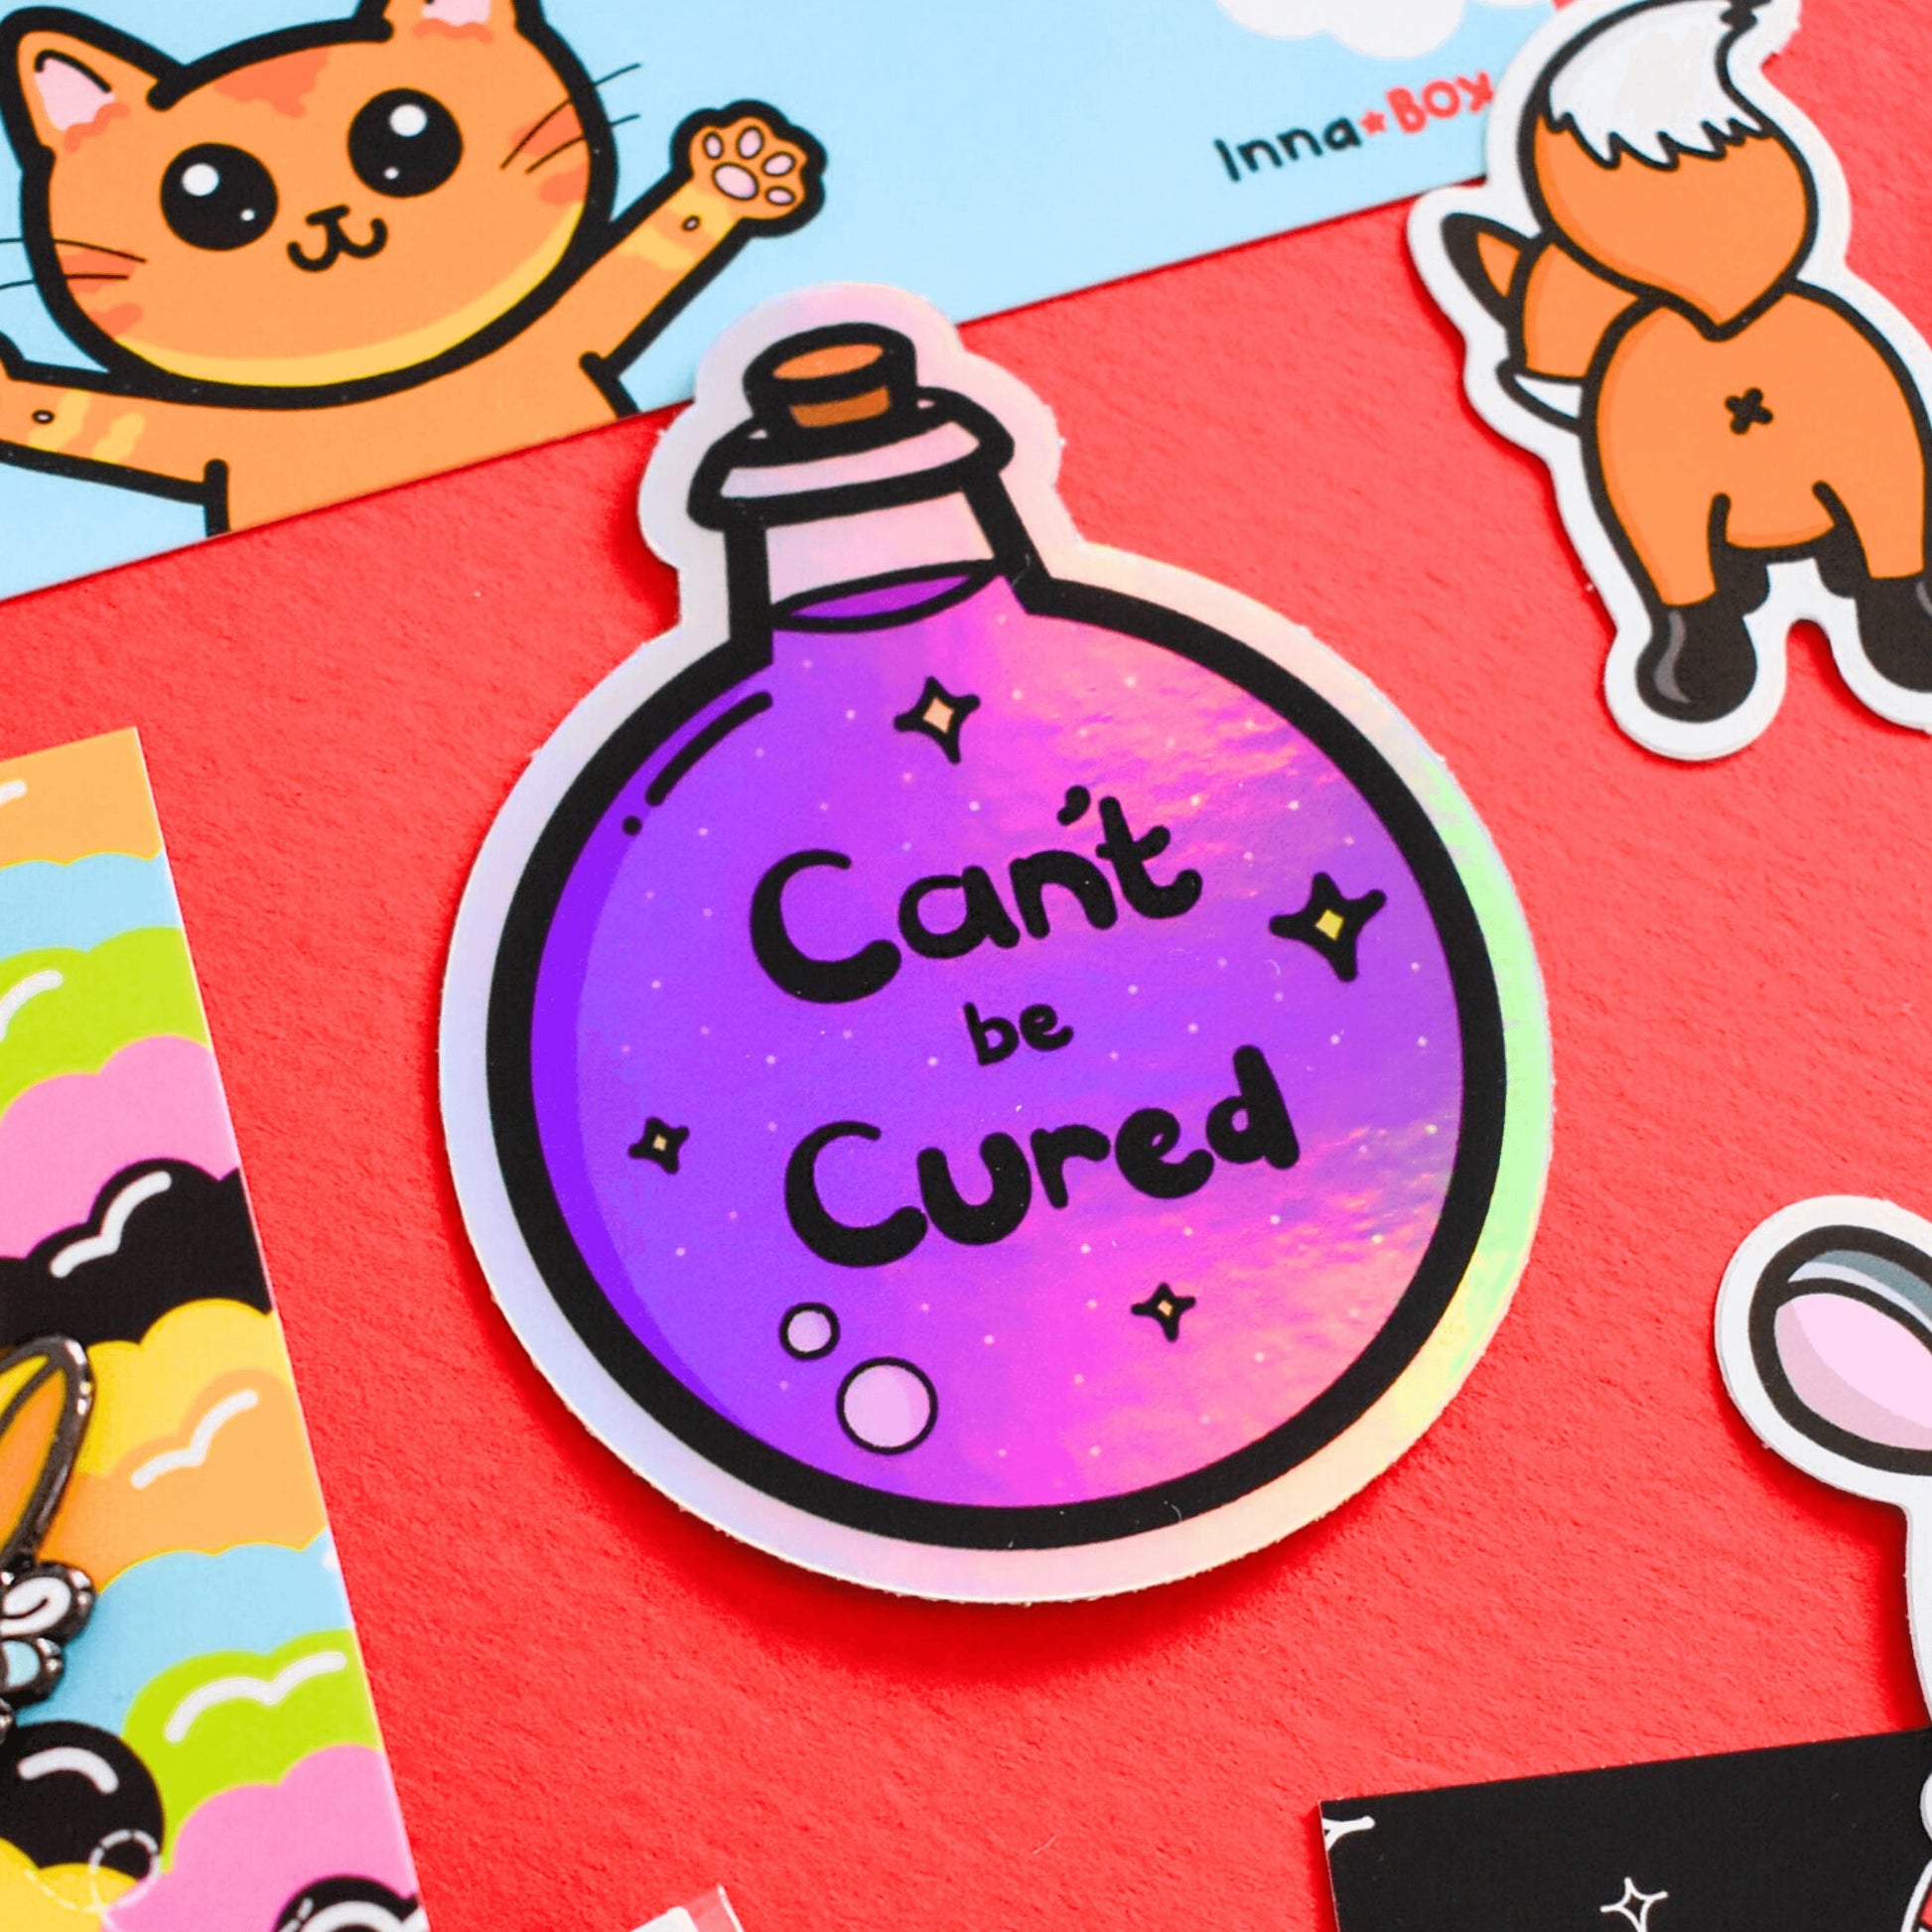 The Can't Be Cured Holographic Sticker on a red background with various other innabox products surrounding it. The sticker is a circular potion bottle with a cork stop top and purple middle. In the middle is white and yellow sparkles, two pastel pink bubbles and black text that reads 'can't be cured'. The design was inspired by chronic illnesses.